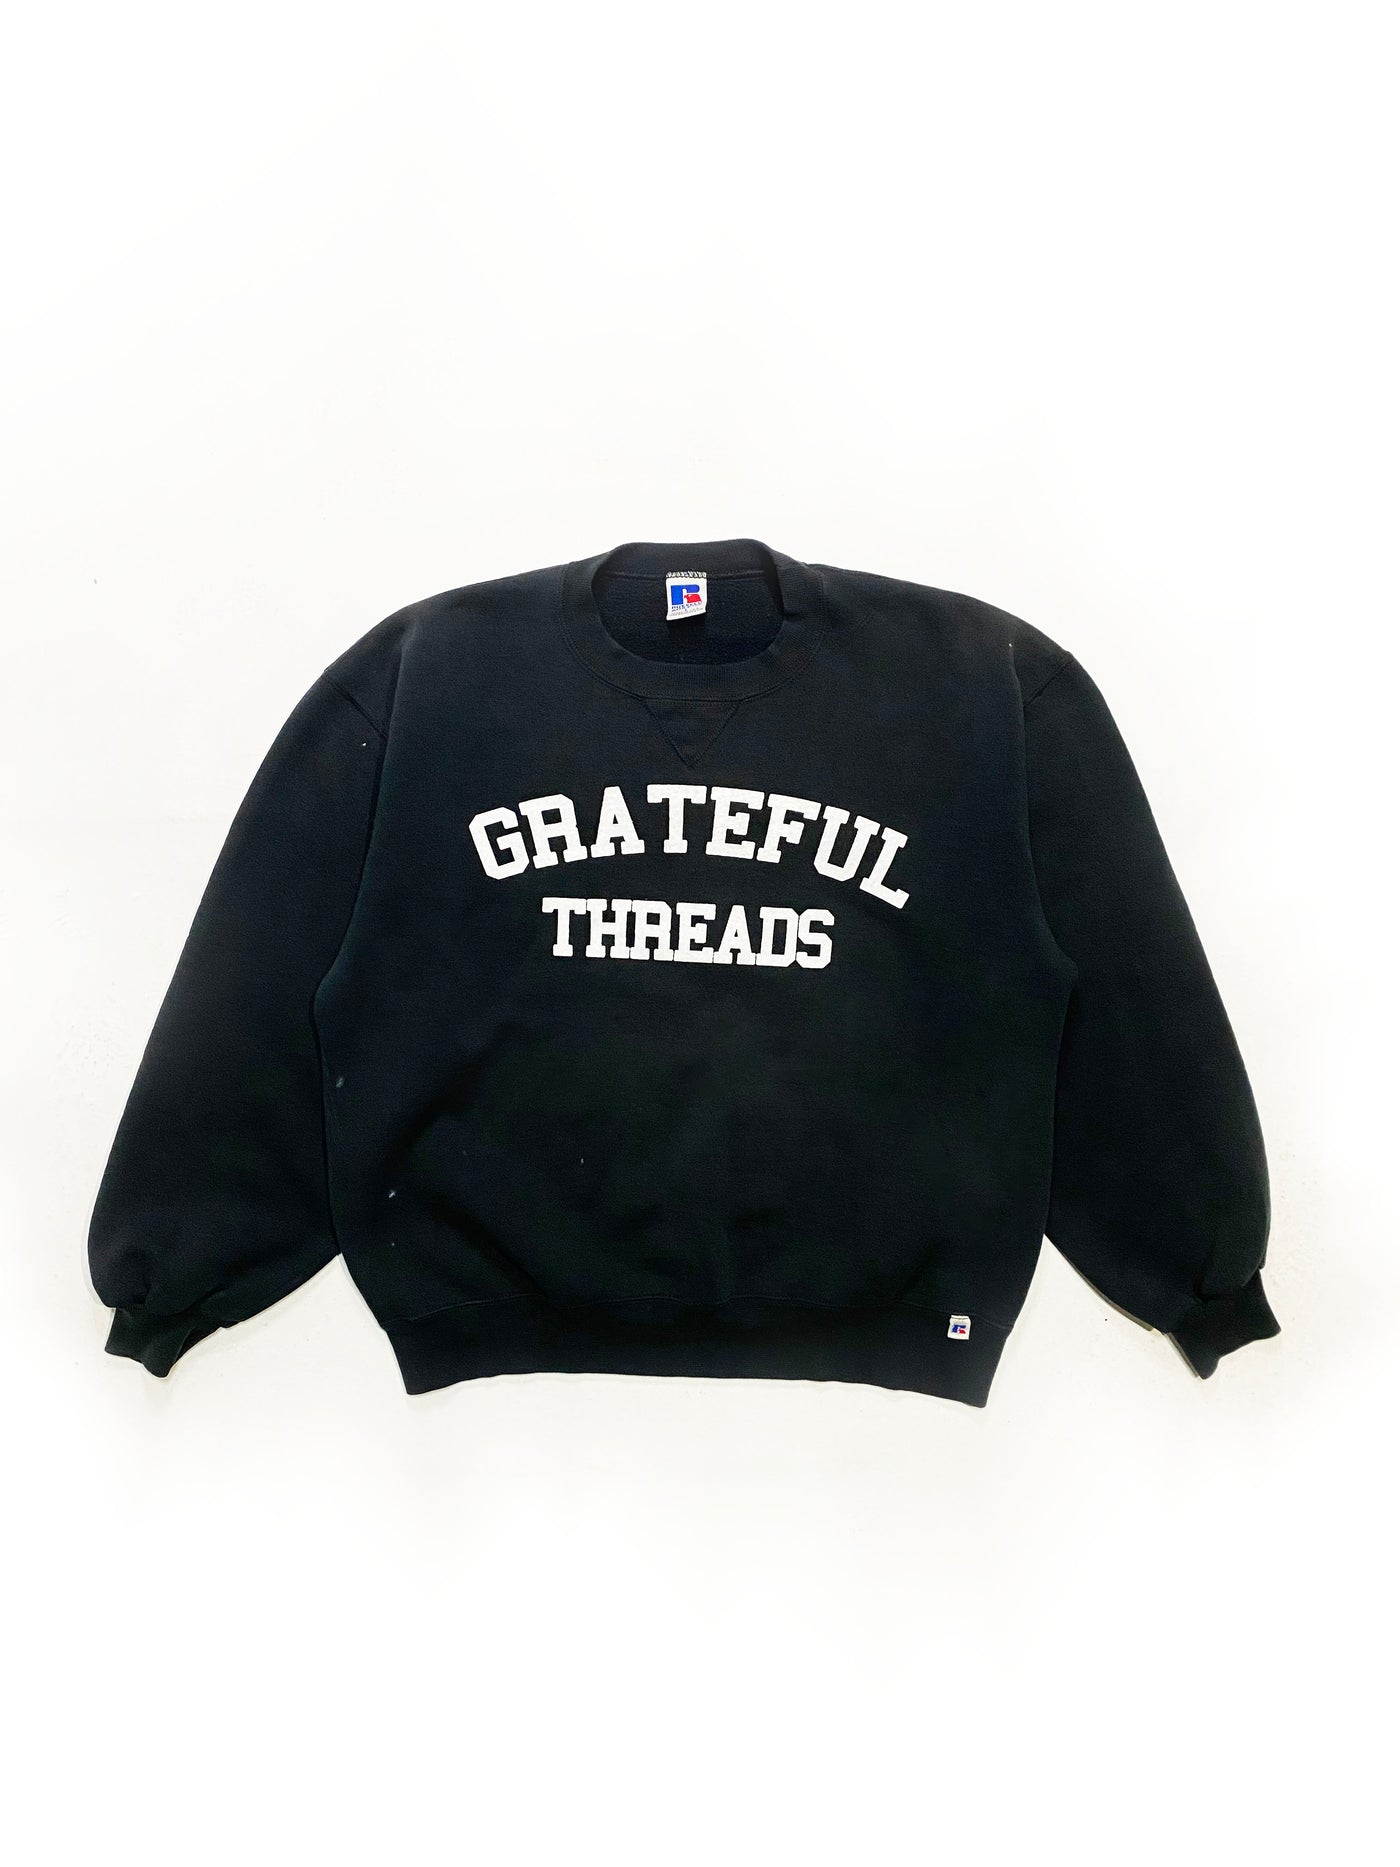 90s Russell Grateful Threads Spellout Crewneck - Black - Size L